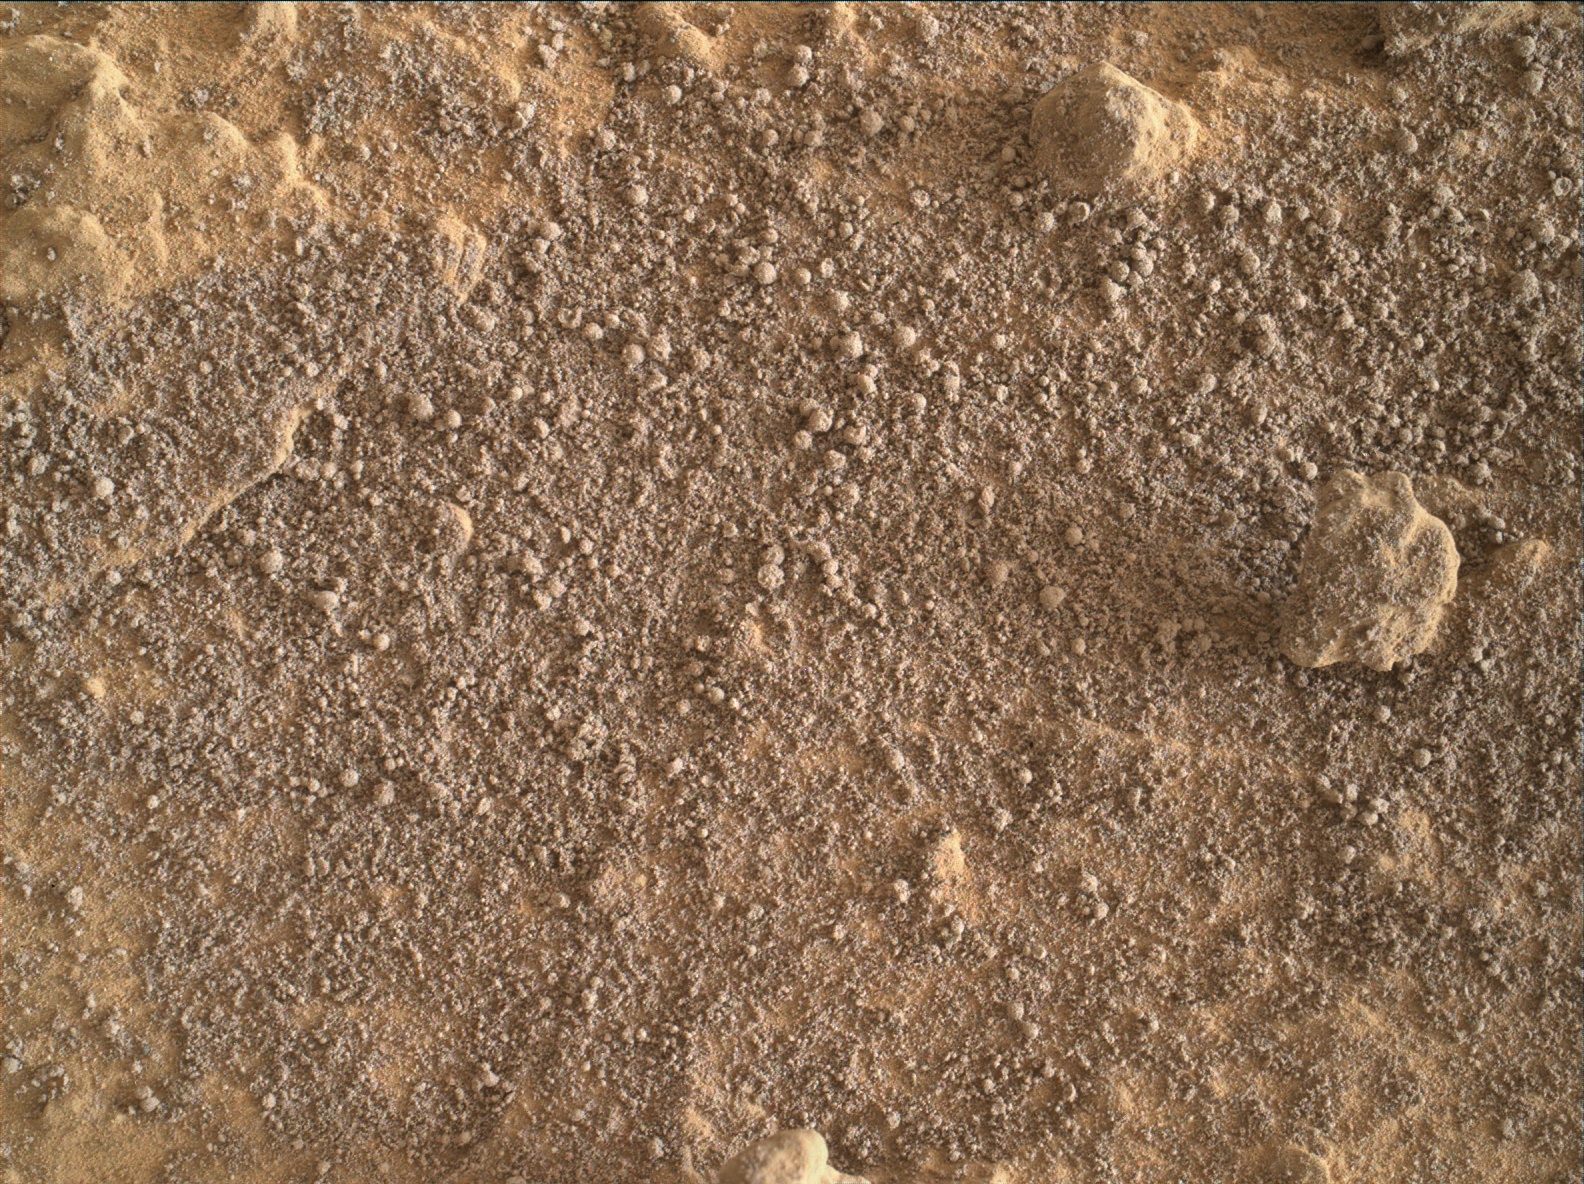 Nasa's Mars rover Curiosity acquired this image using its Mars Hand Lens Imager (MAHLI) on Sol 1459